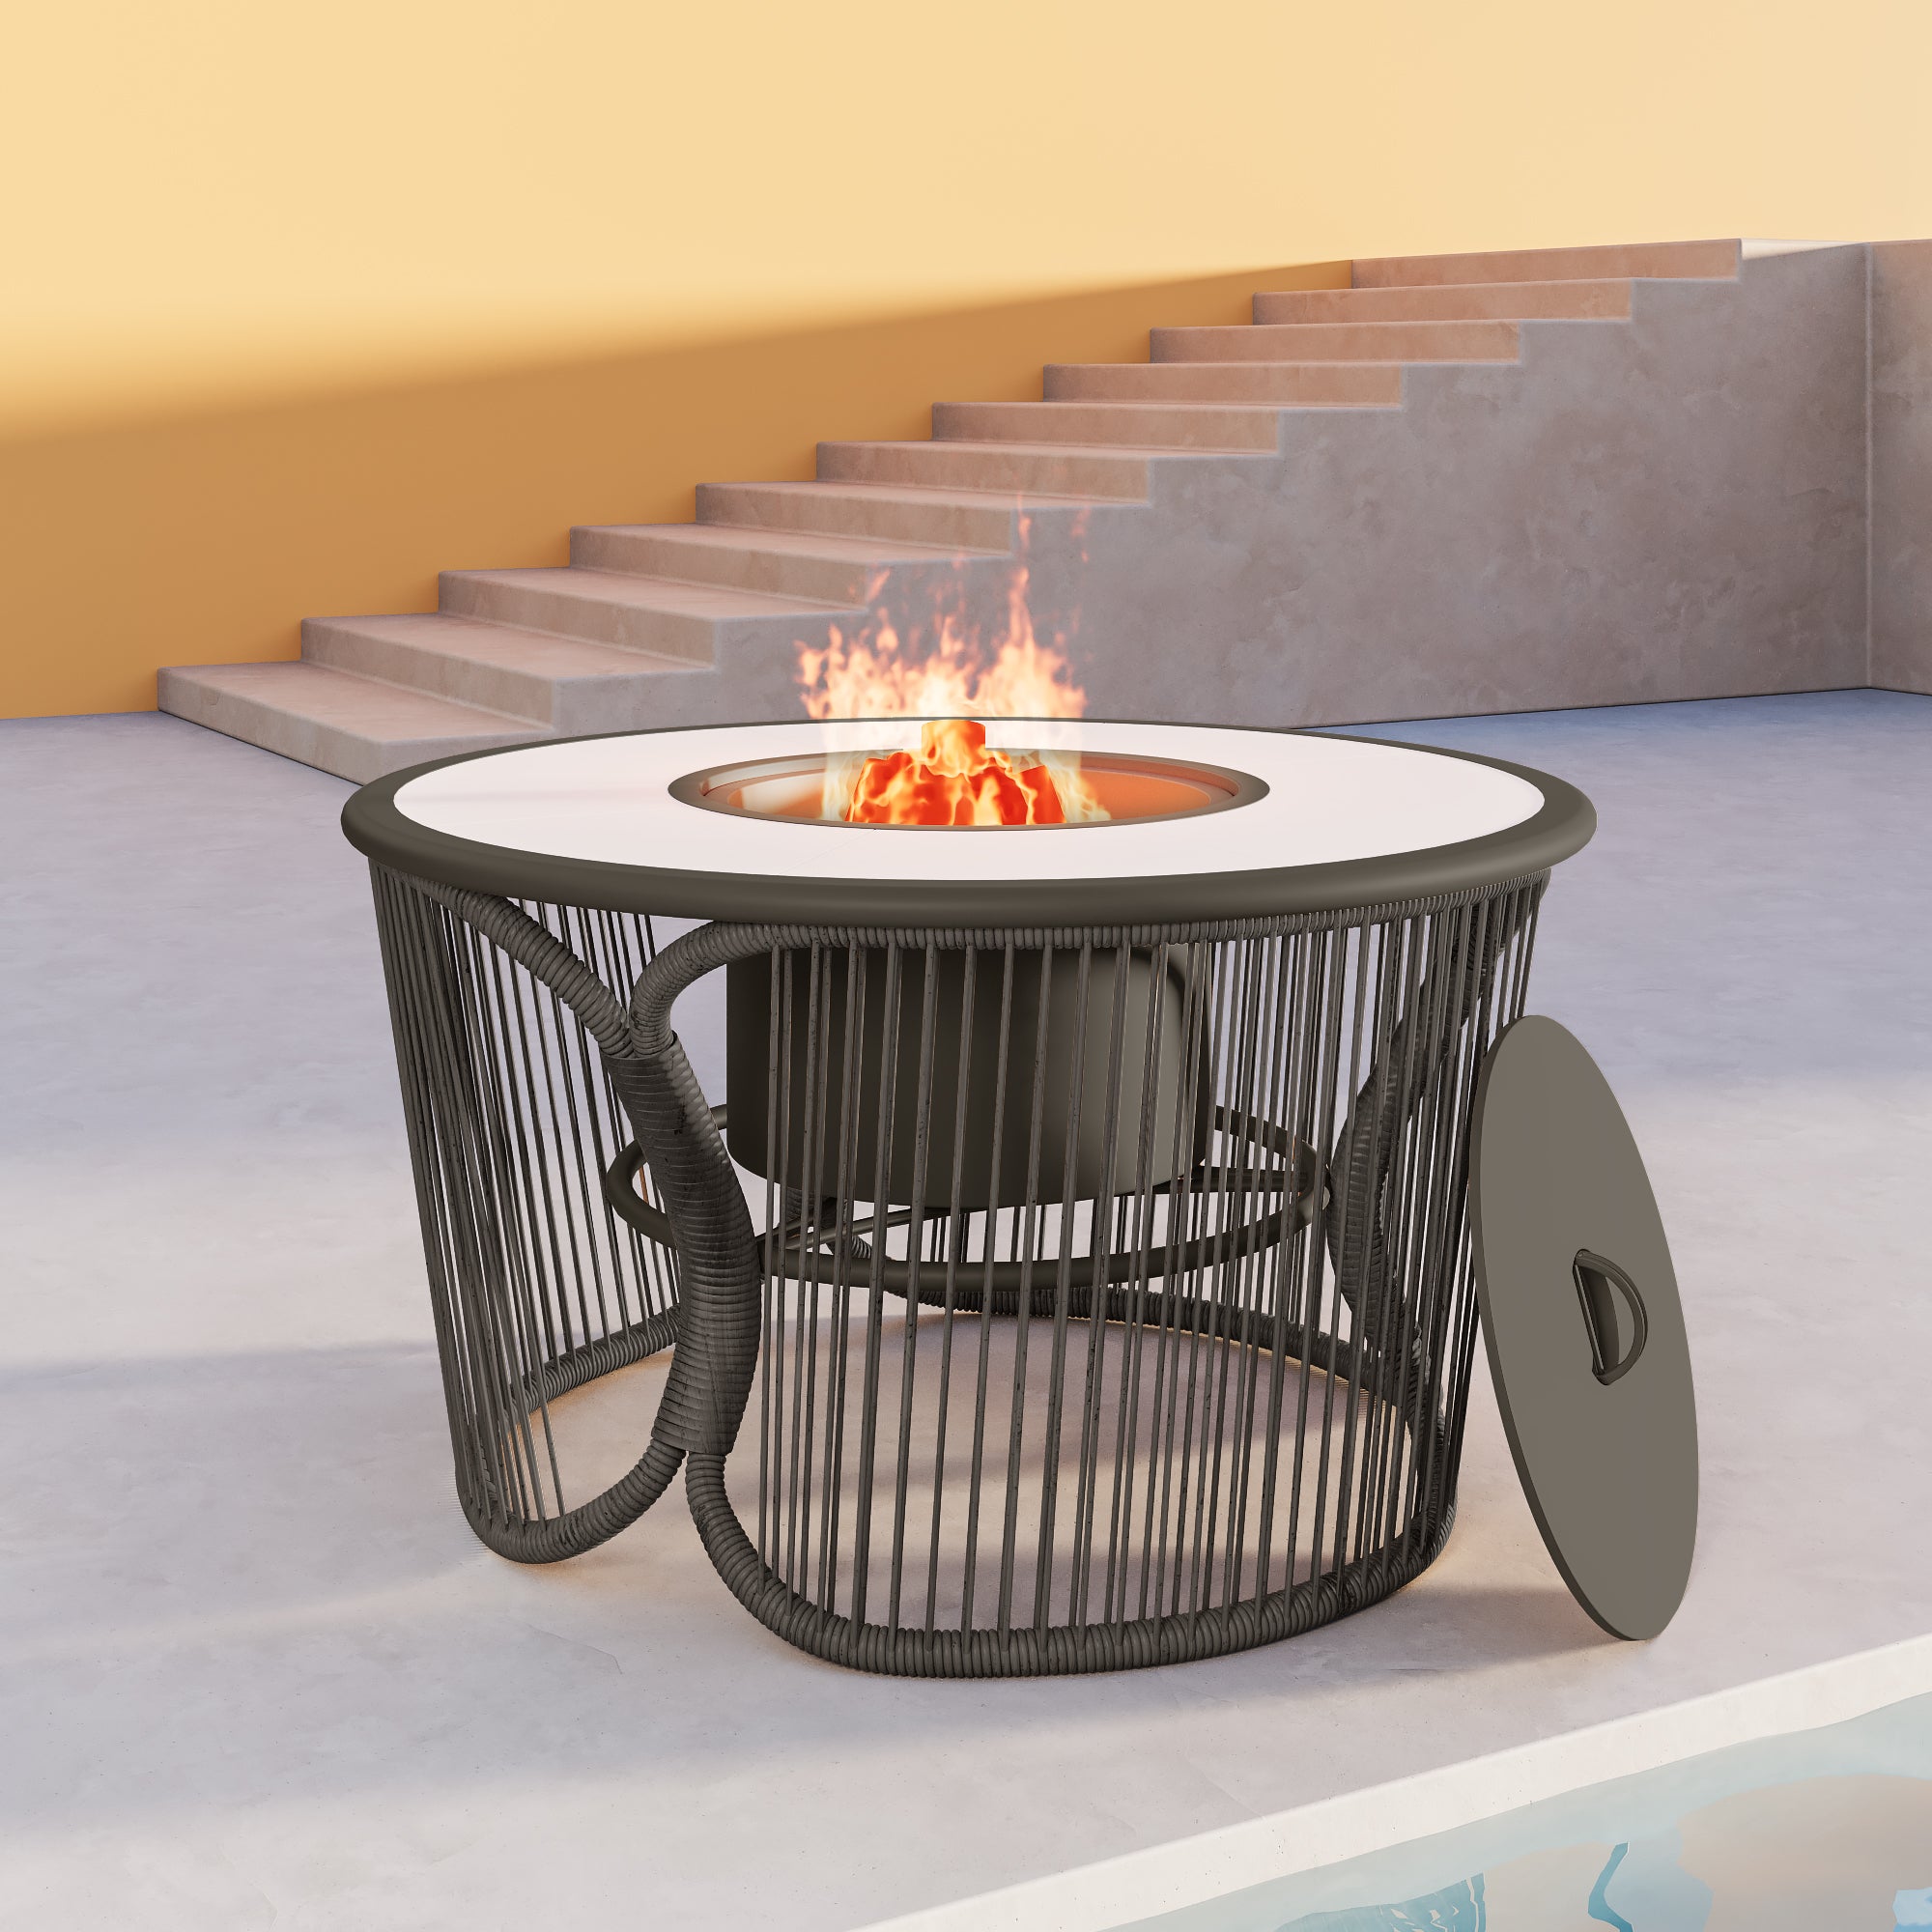 LAUSAINT HOME 3 in 1 Fire Pit  for Backyard Bonfire Patio Outside